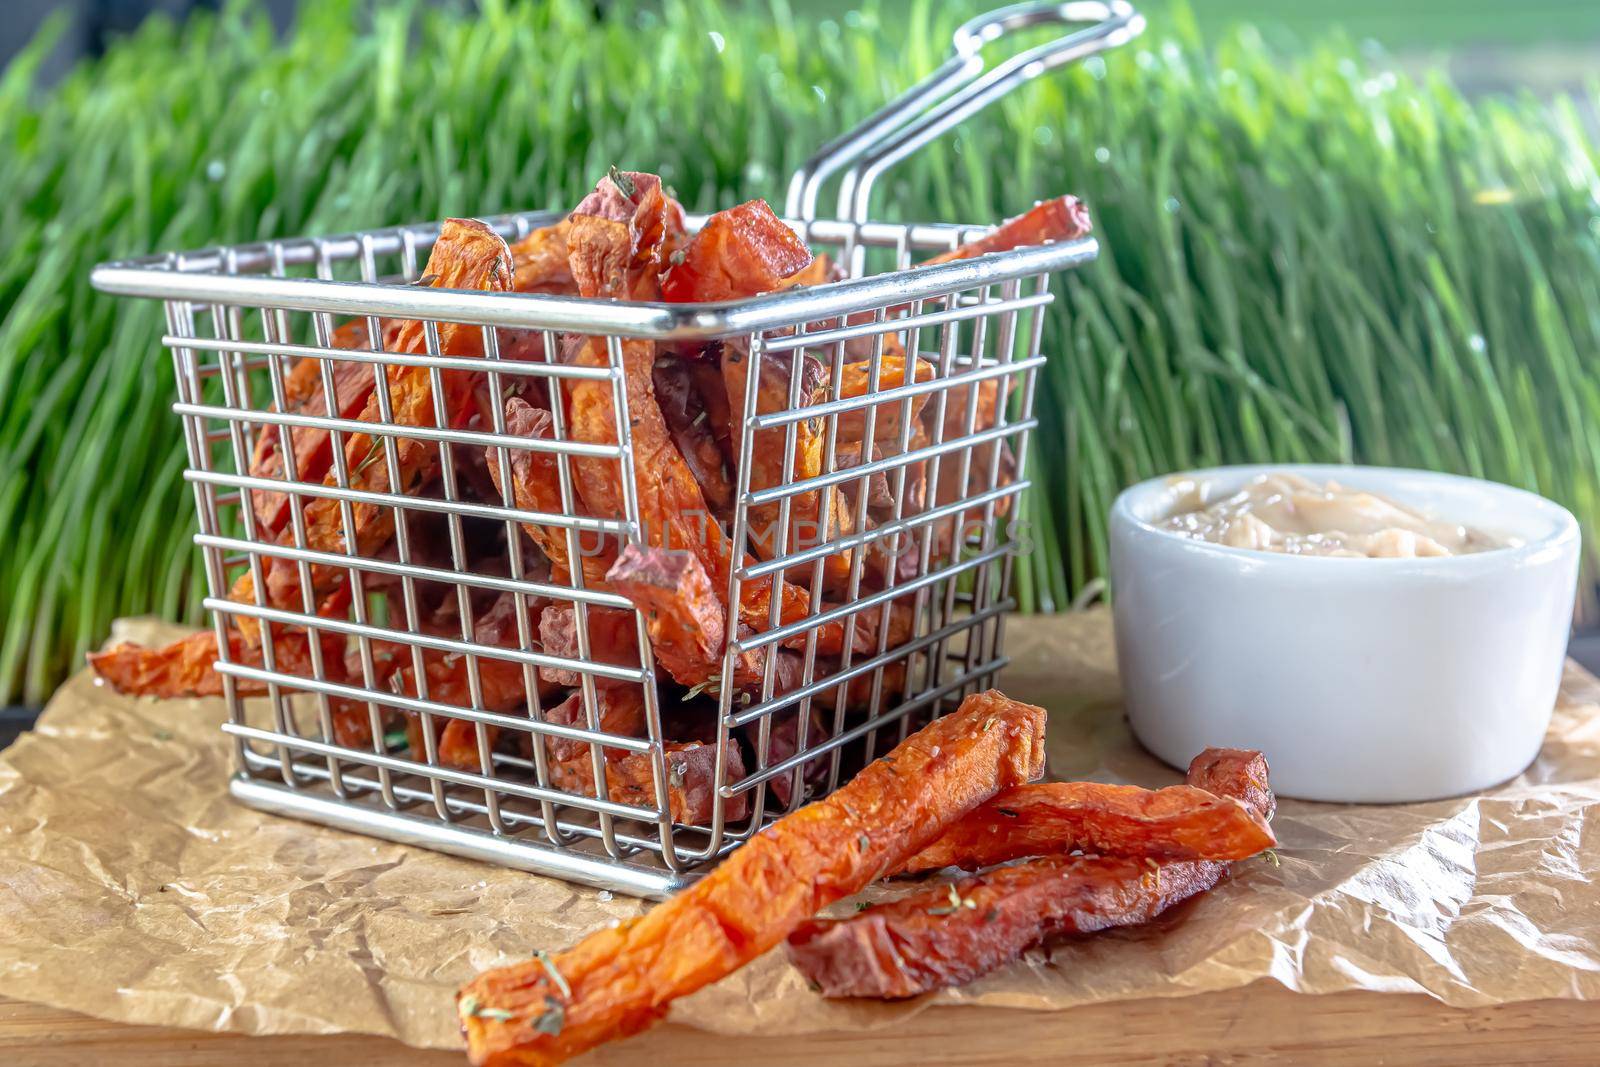 deep fried potato fries sweet potato in a fat frying basket, unhealthy and junk food concept by Milanchikov